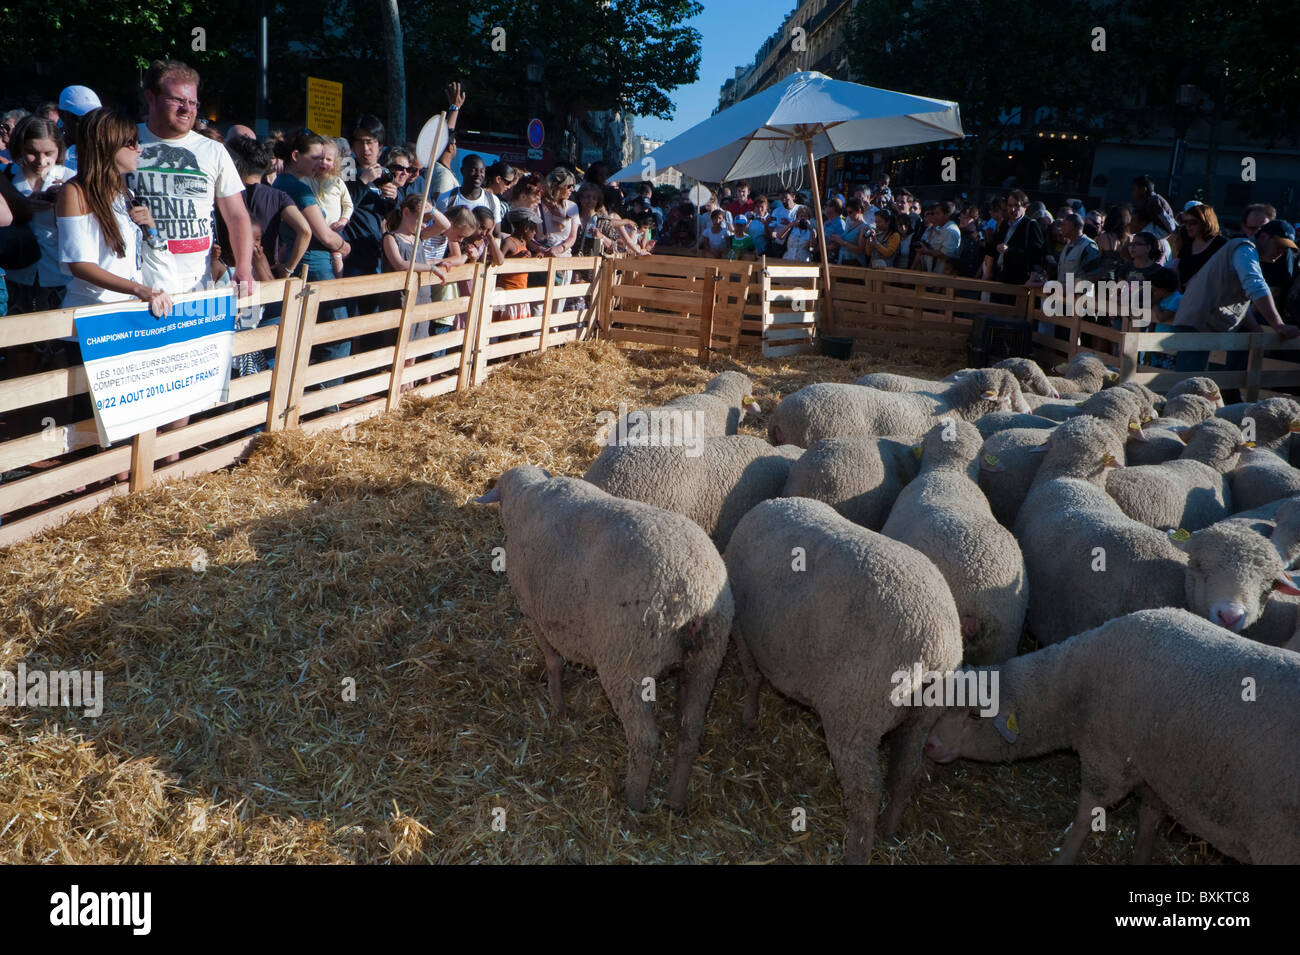 Crowd Tourists, Visiting Paris, France, Garden Festival, Herd of Sheep at Farmer's Event Stock Photo